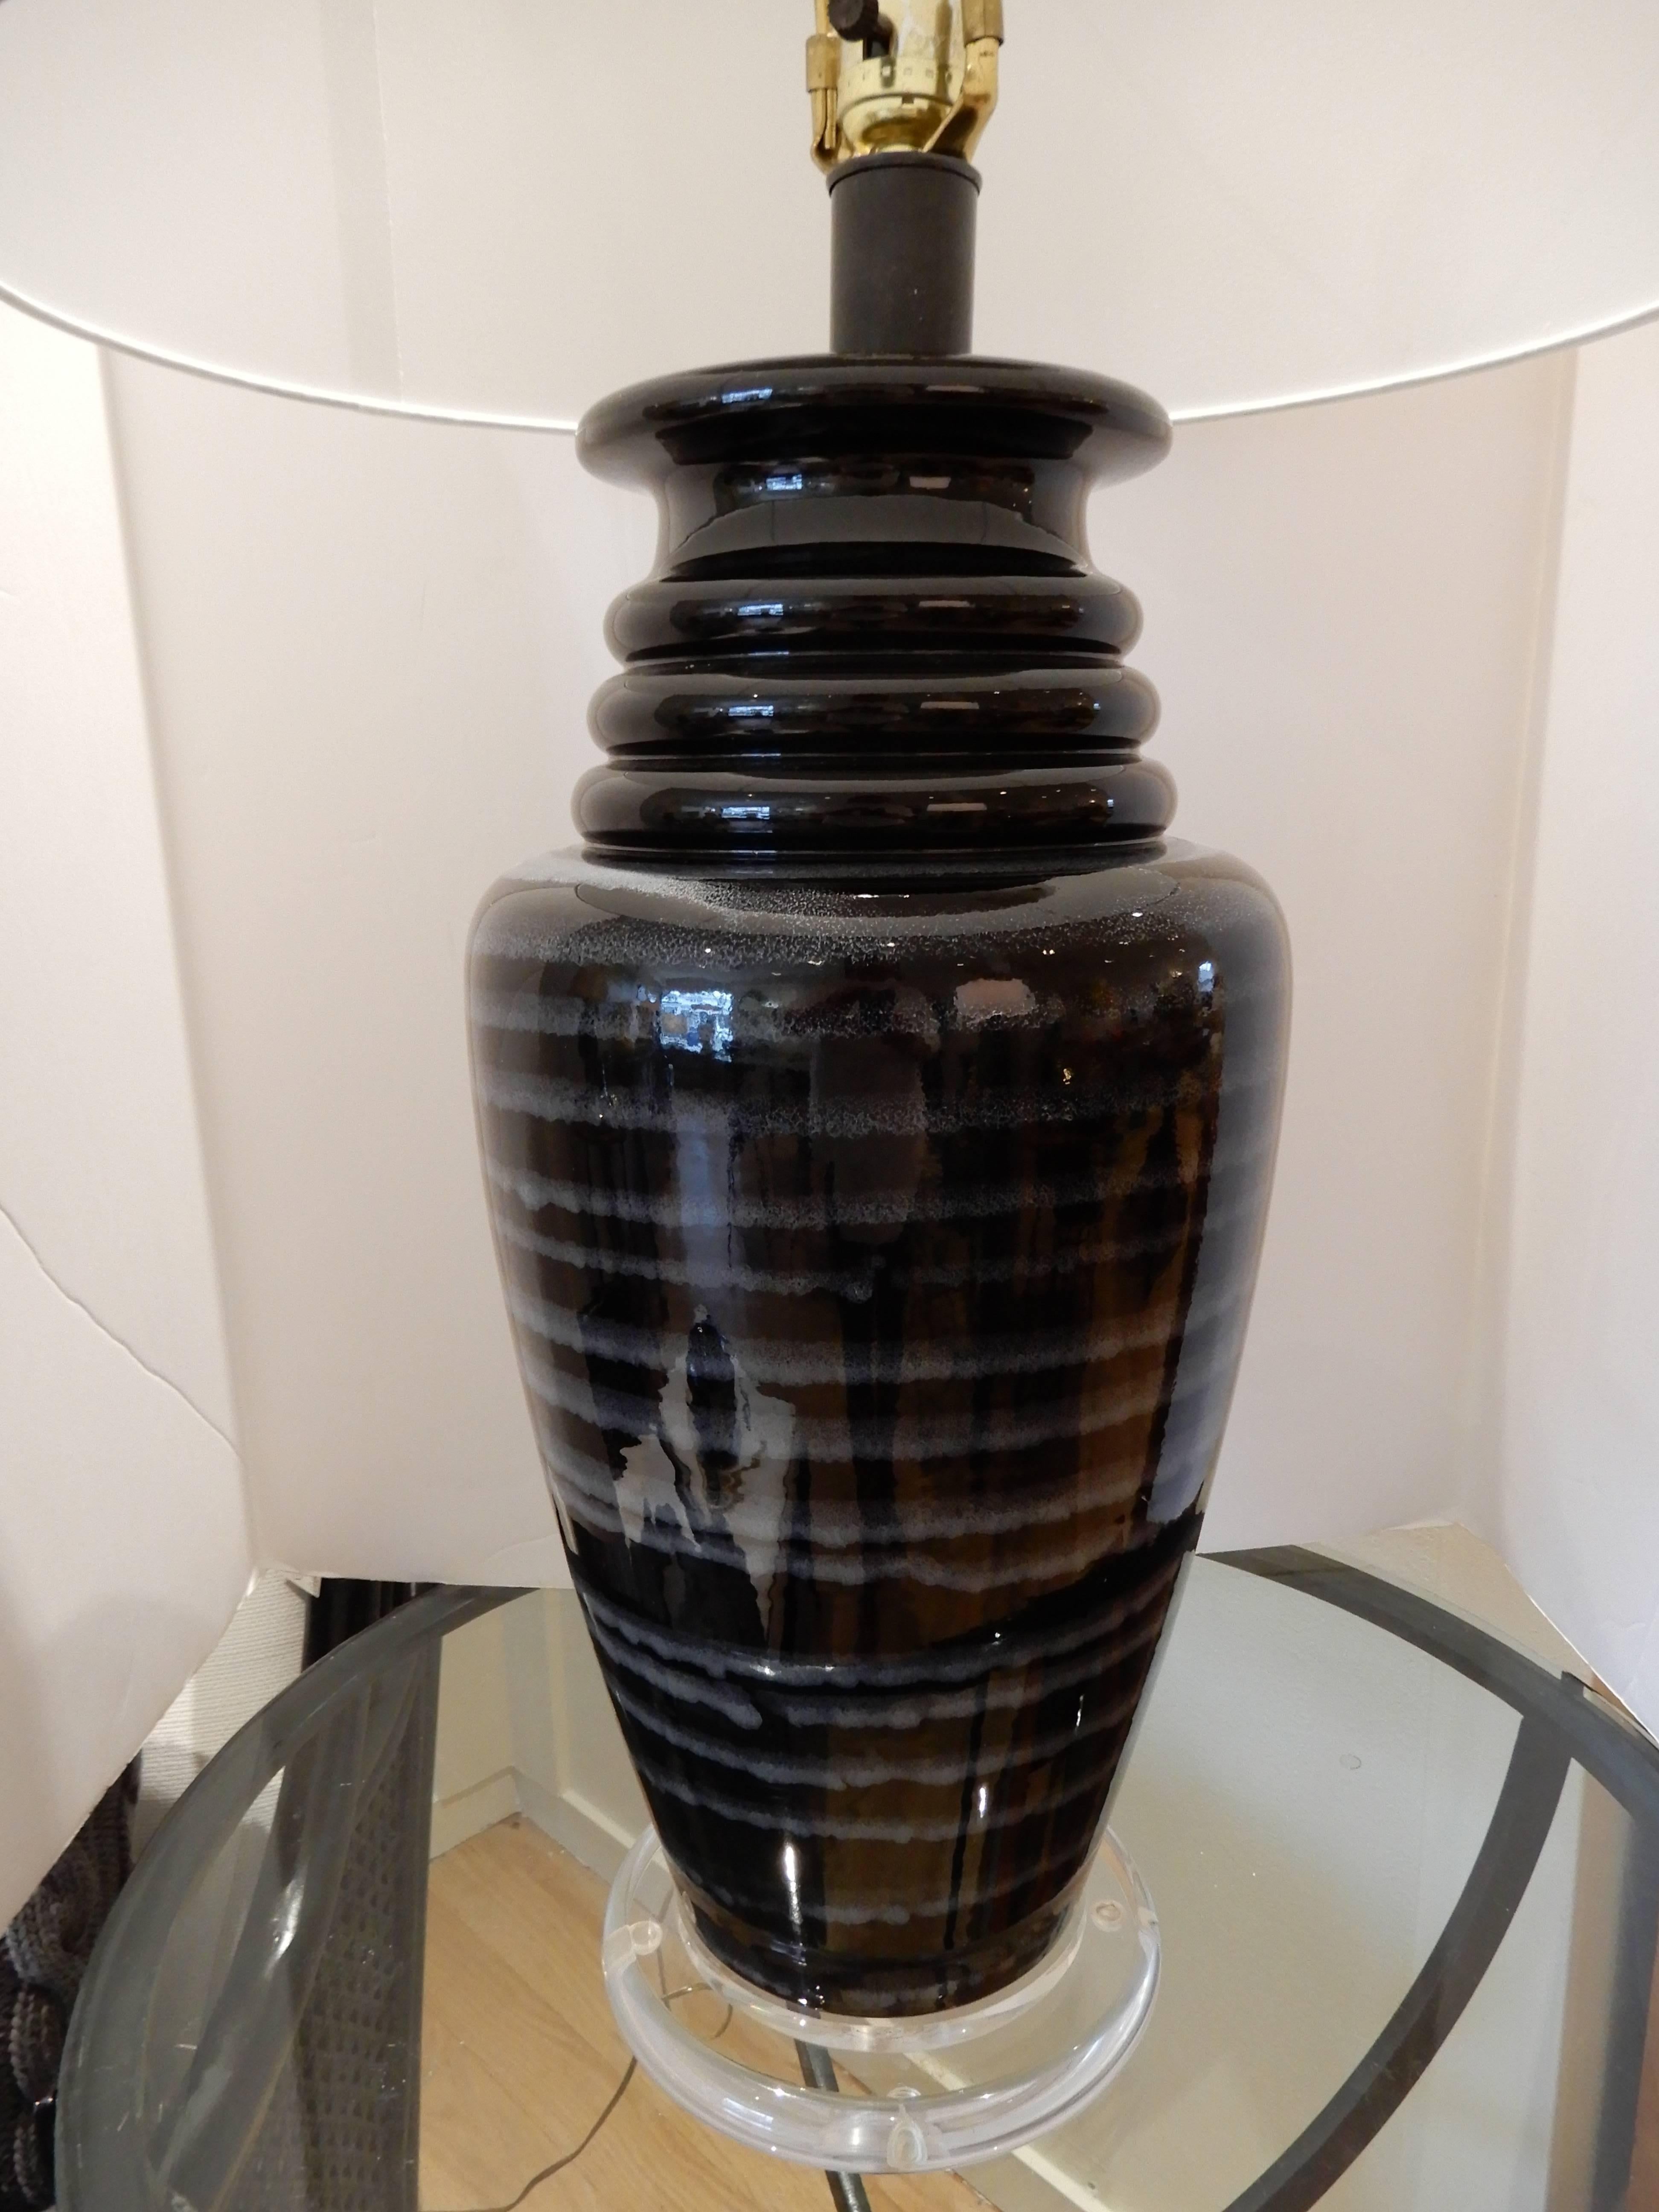 A  1970s tall black and white  Art Glass table lamp. Hand blown, with a  Lucite base. Three way switch, original black finial.
White drum shade, works in many settings.